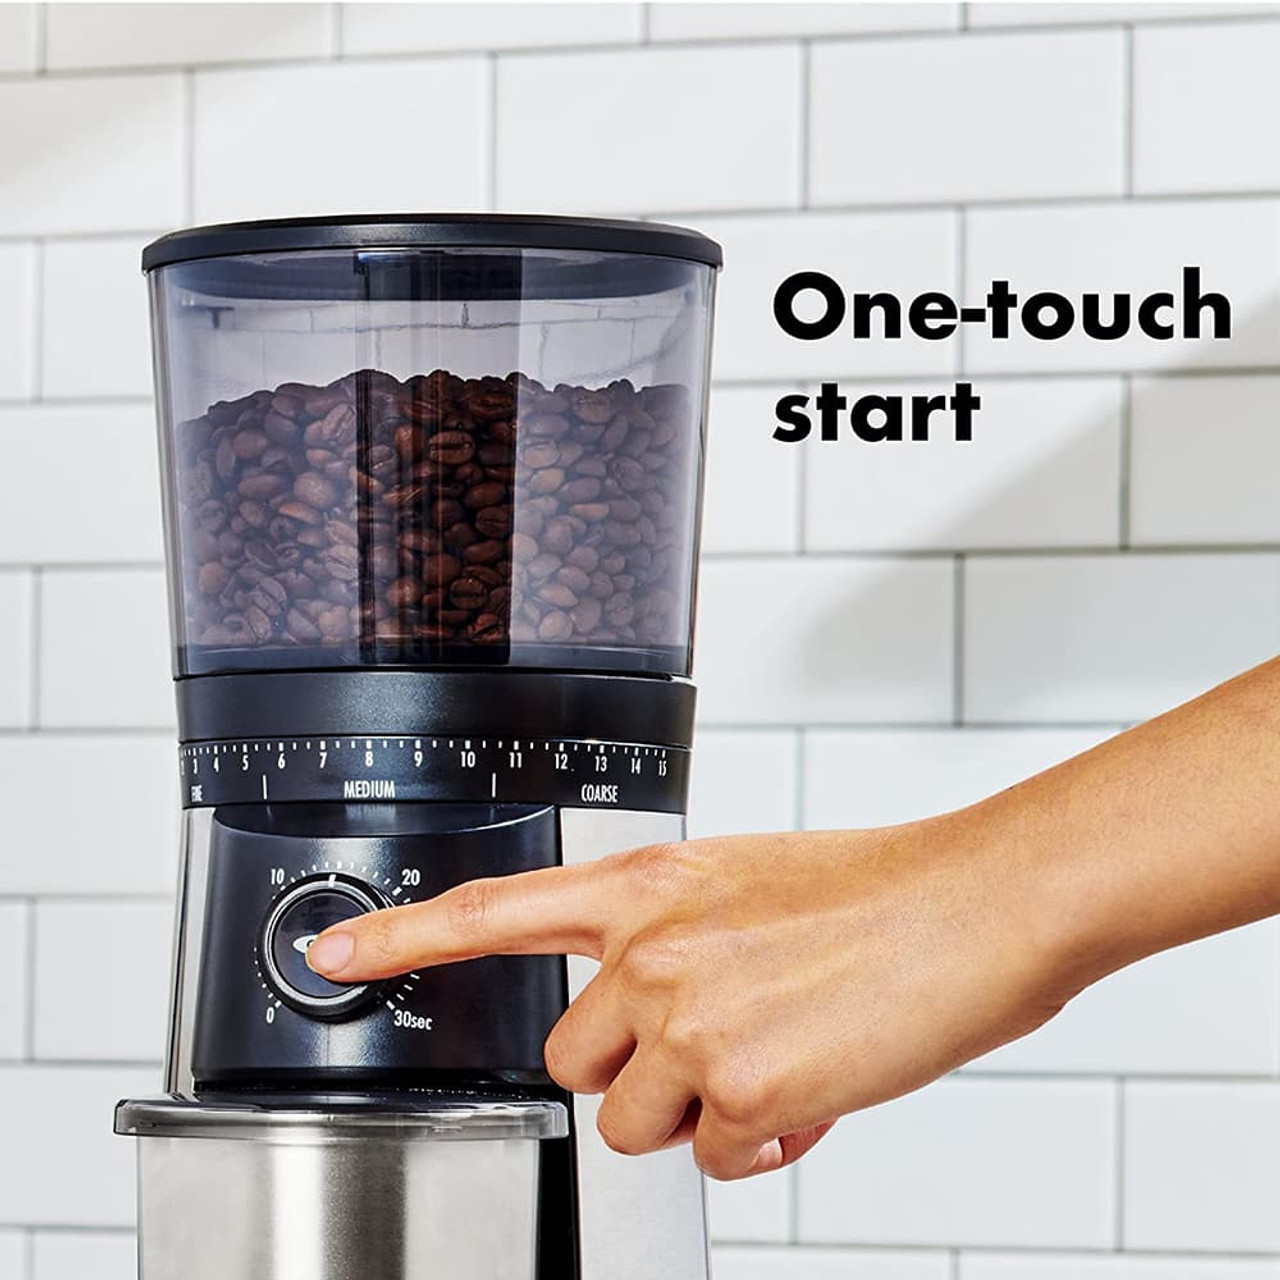 How to Use the OXO Brew Conical Burr Coffee Grinder with